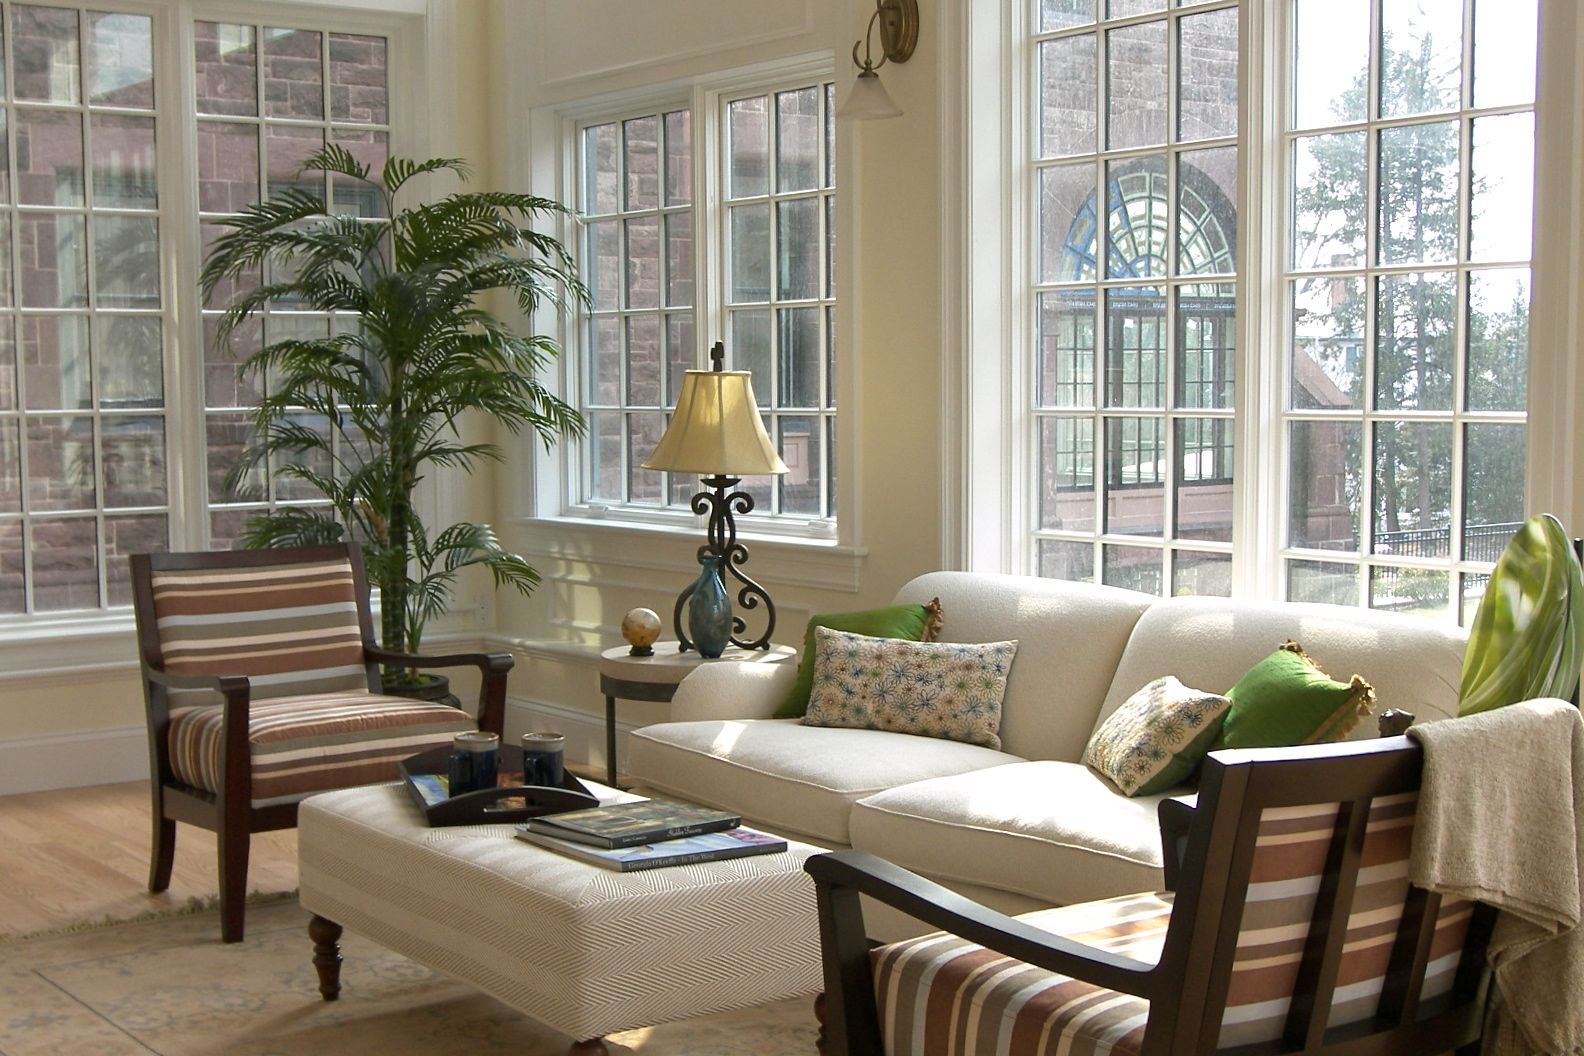 Splendid Sun Rooms Interior Designs That Will Offer You A Real Pleasure